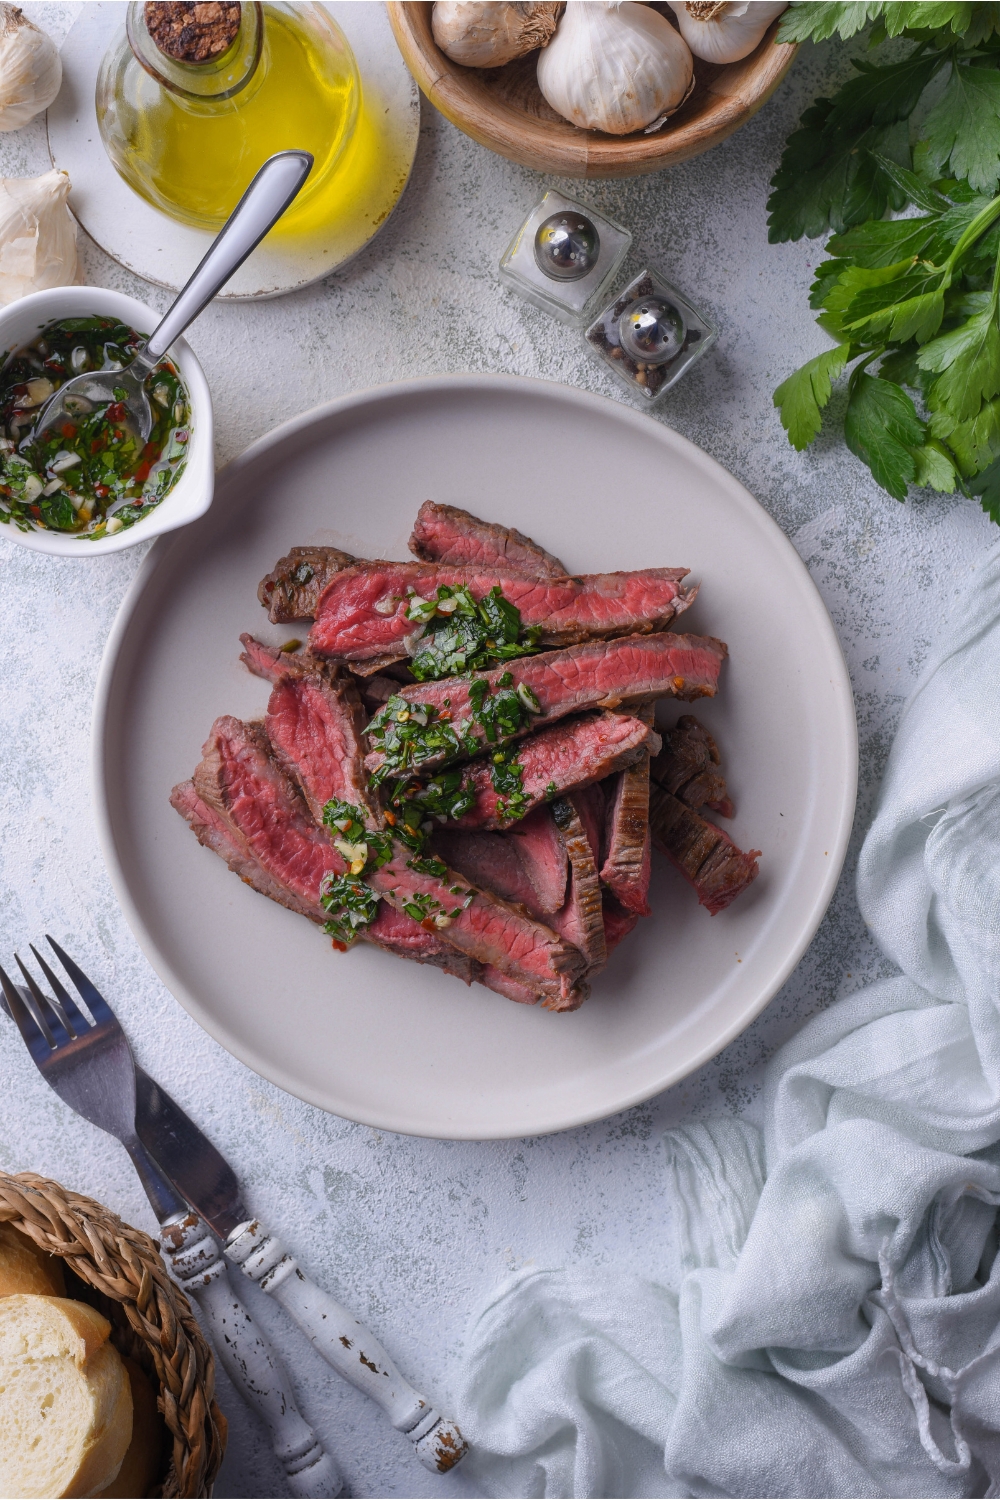 Thinly sliced bavette steak piled on a white plate and covered in chimichurri sauce. The plate of steak is surrounded by an assortment of ingredients.